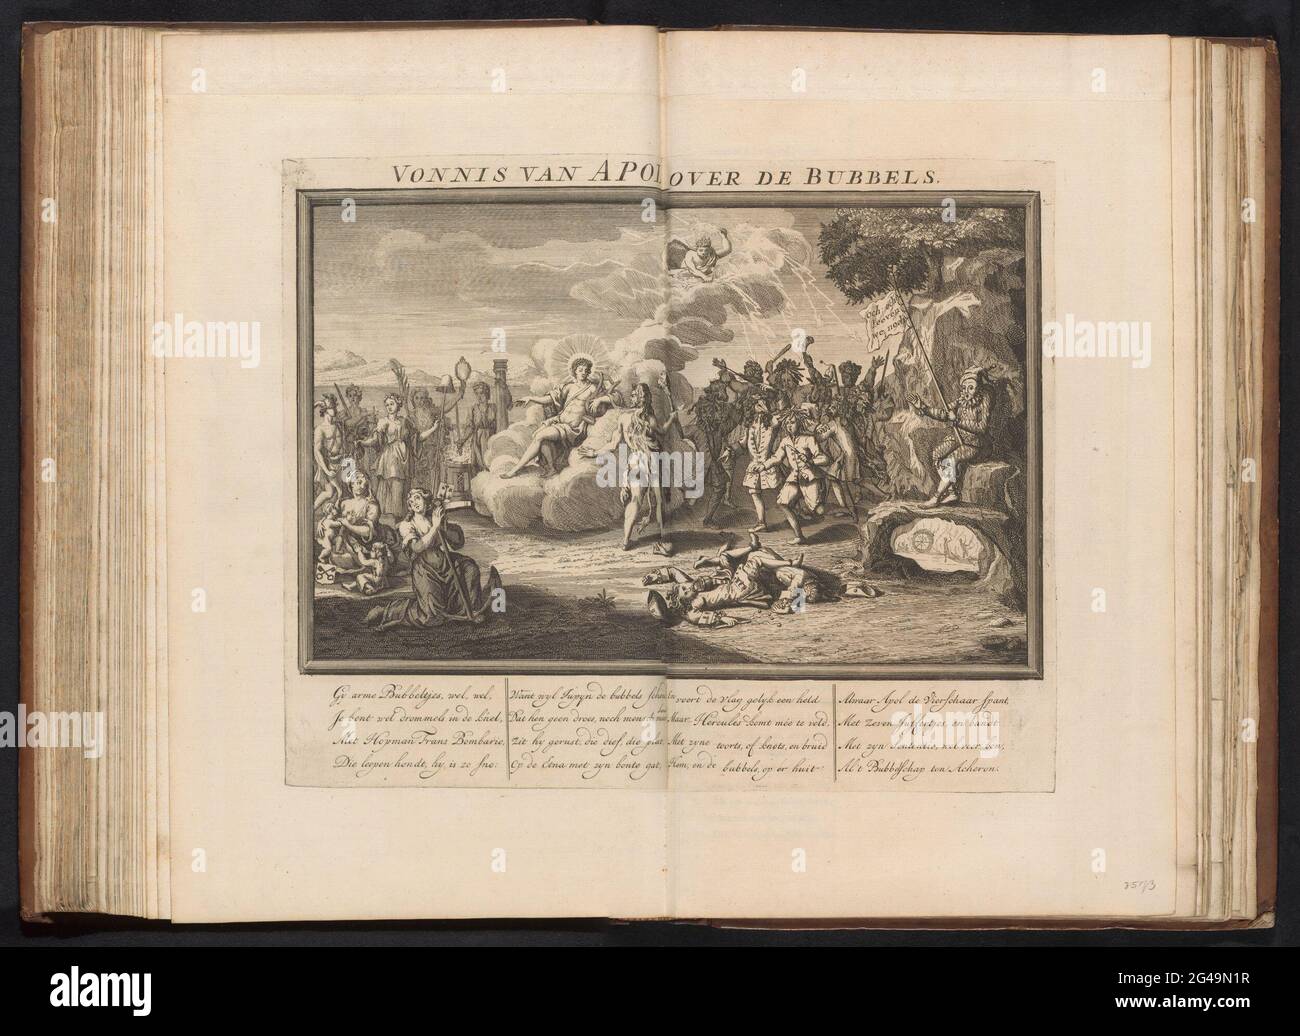 Apollo judges about the promotionists, 1720; Apol judgment over the bubbles; The great scene of foolishness. Apollo judges a group of desperate promoters, in the middle Hercules with patt, right is the Harlequin Bombario with banner. Left city tongs like the muses. With caption in four columns. Print in the bound first edition (304 B 11) from the great scene of foolishness with cartriders on the wind trade or action trade of 1720. Stock Photo